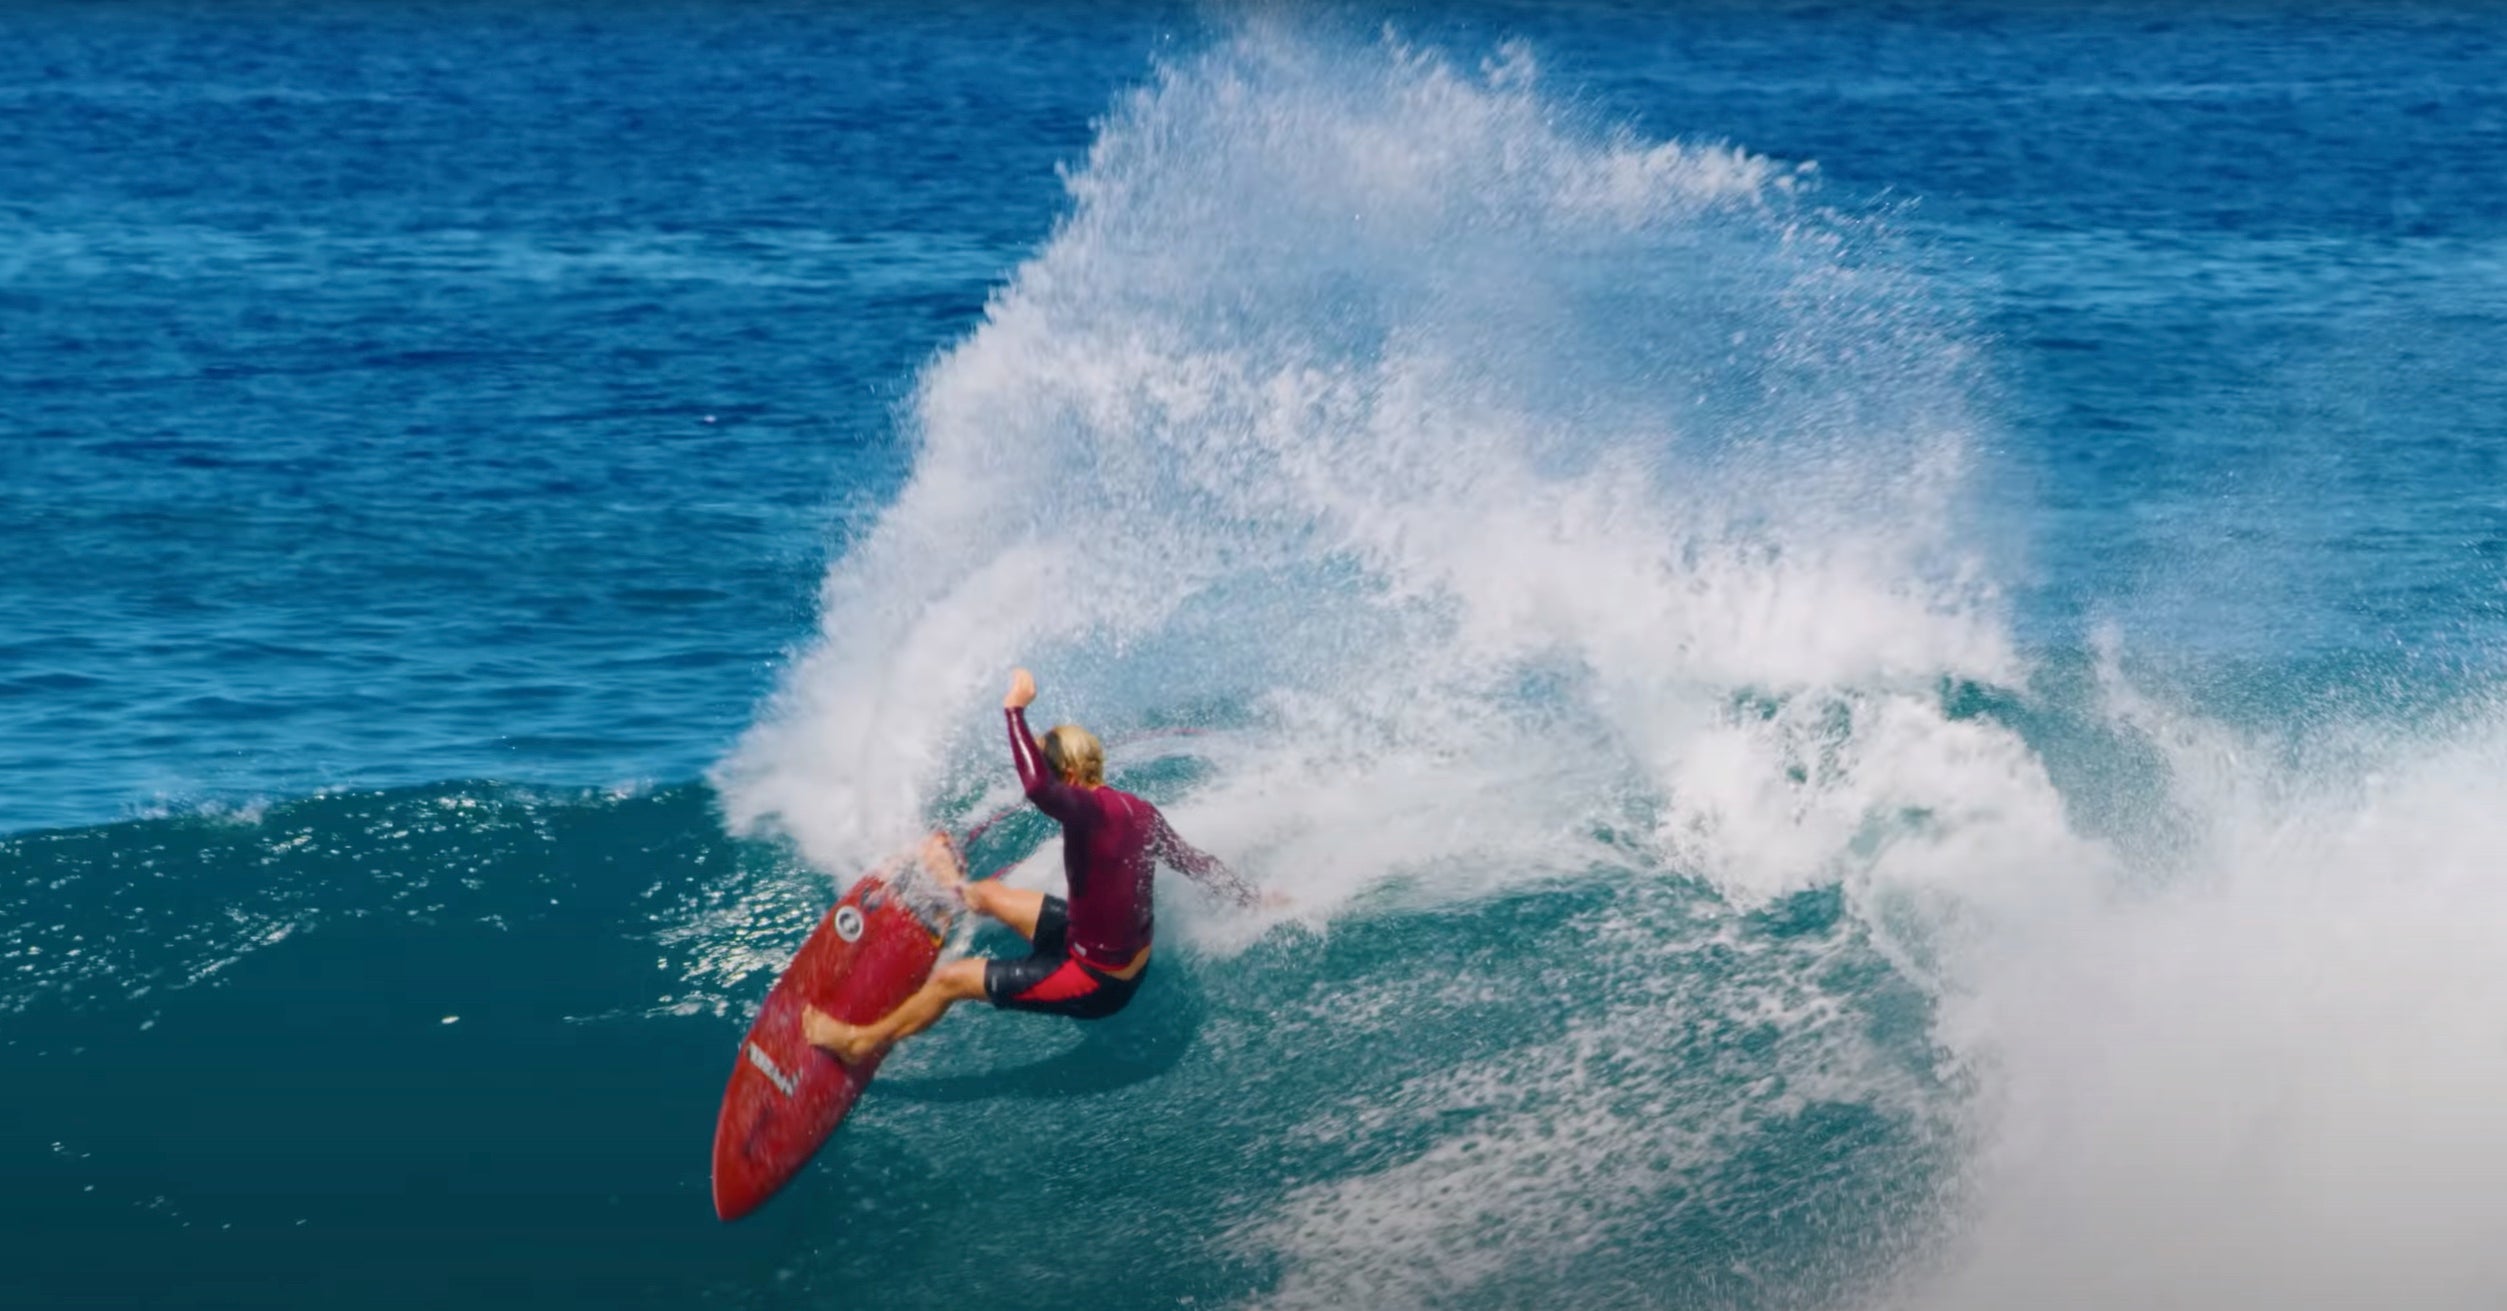 Tapping The Well With John John Florence